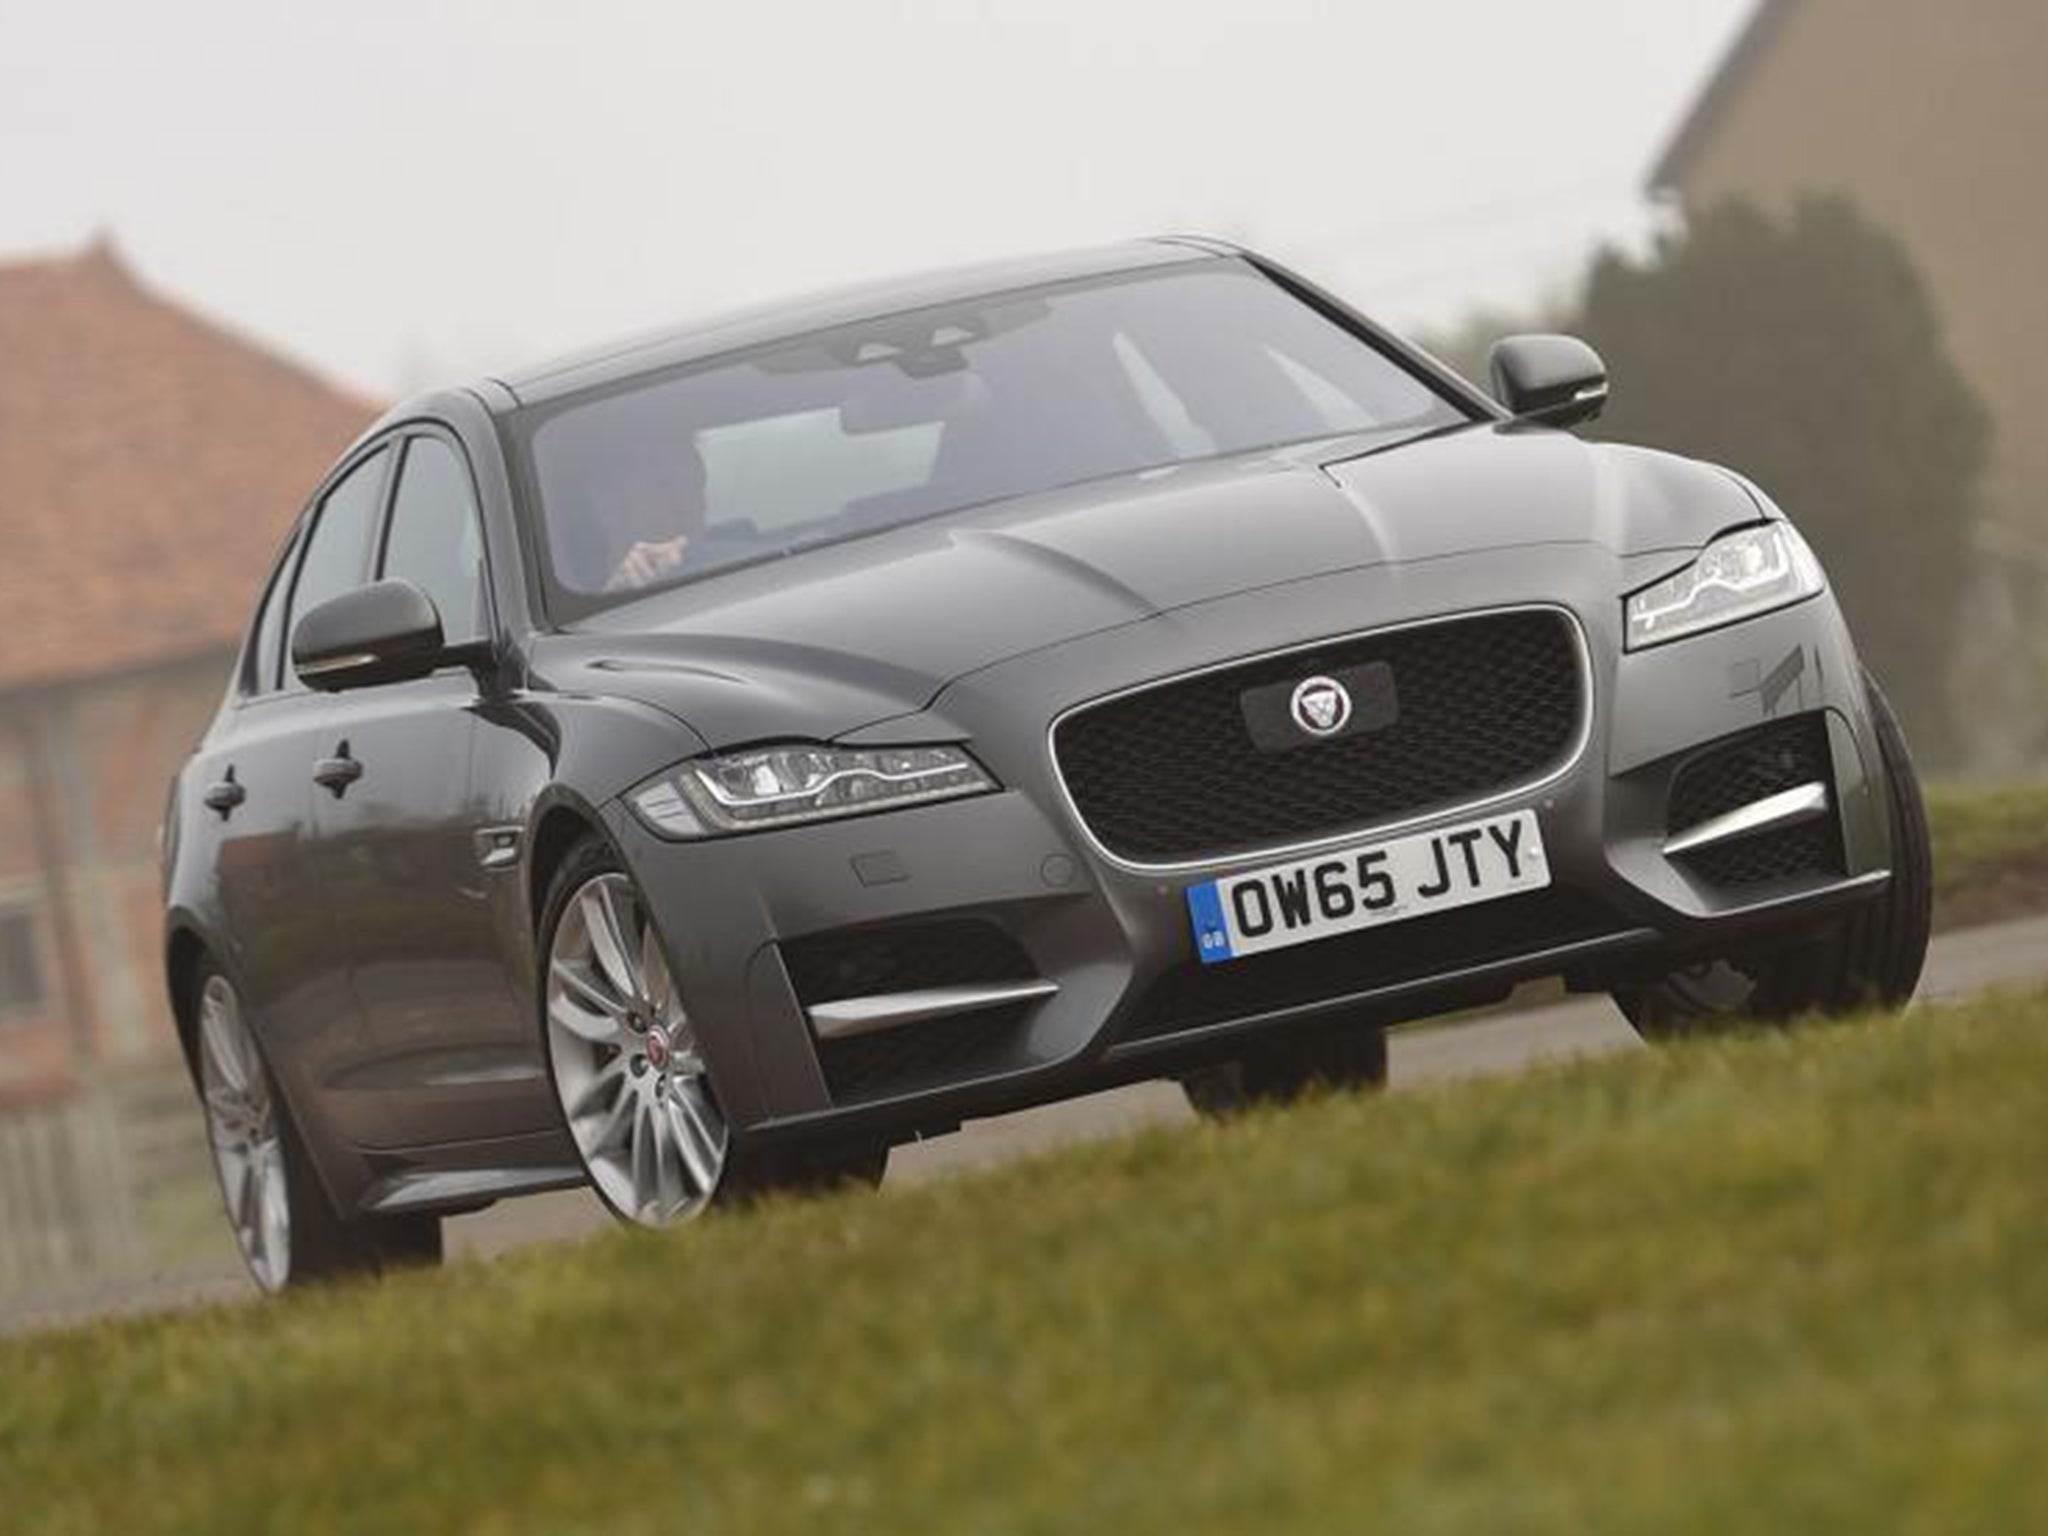 Jaguar XF 2.0d 180 AWD R-Sport, car review: Four-wheel drive makes this a  car for all roads and weathers | The Independent | The Independent